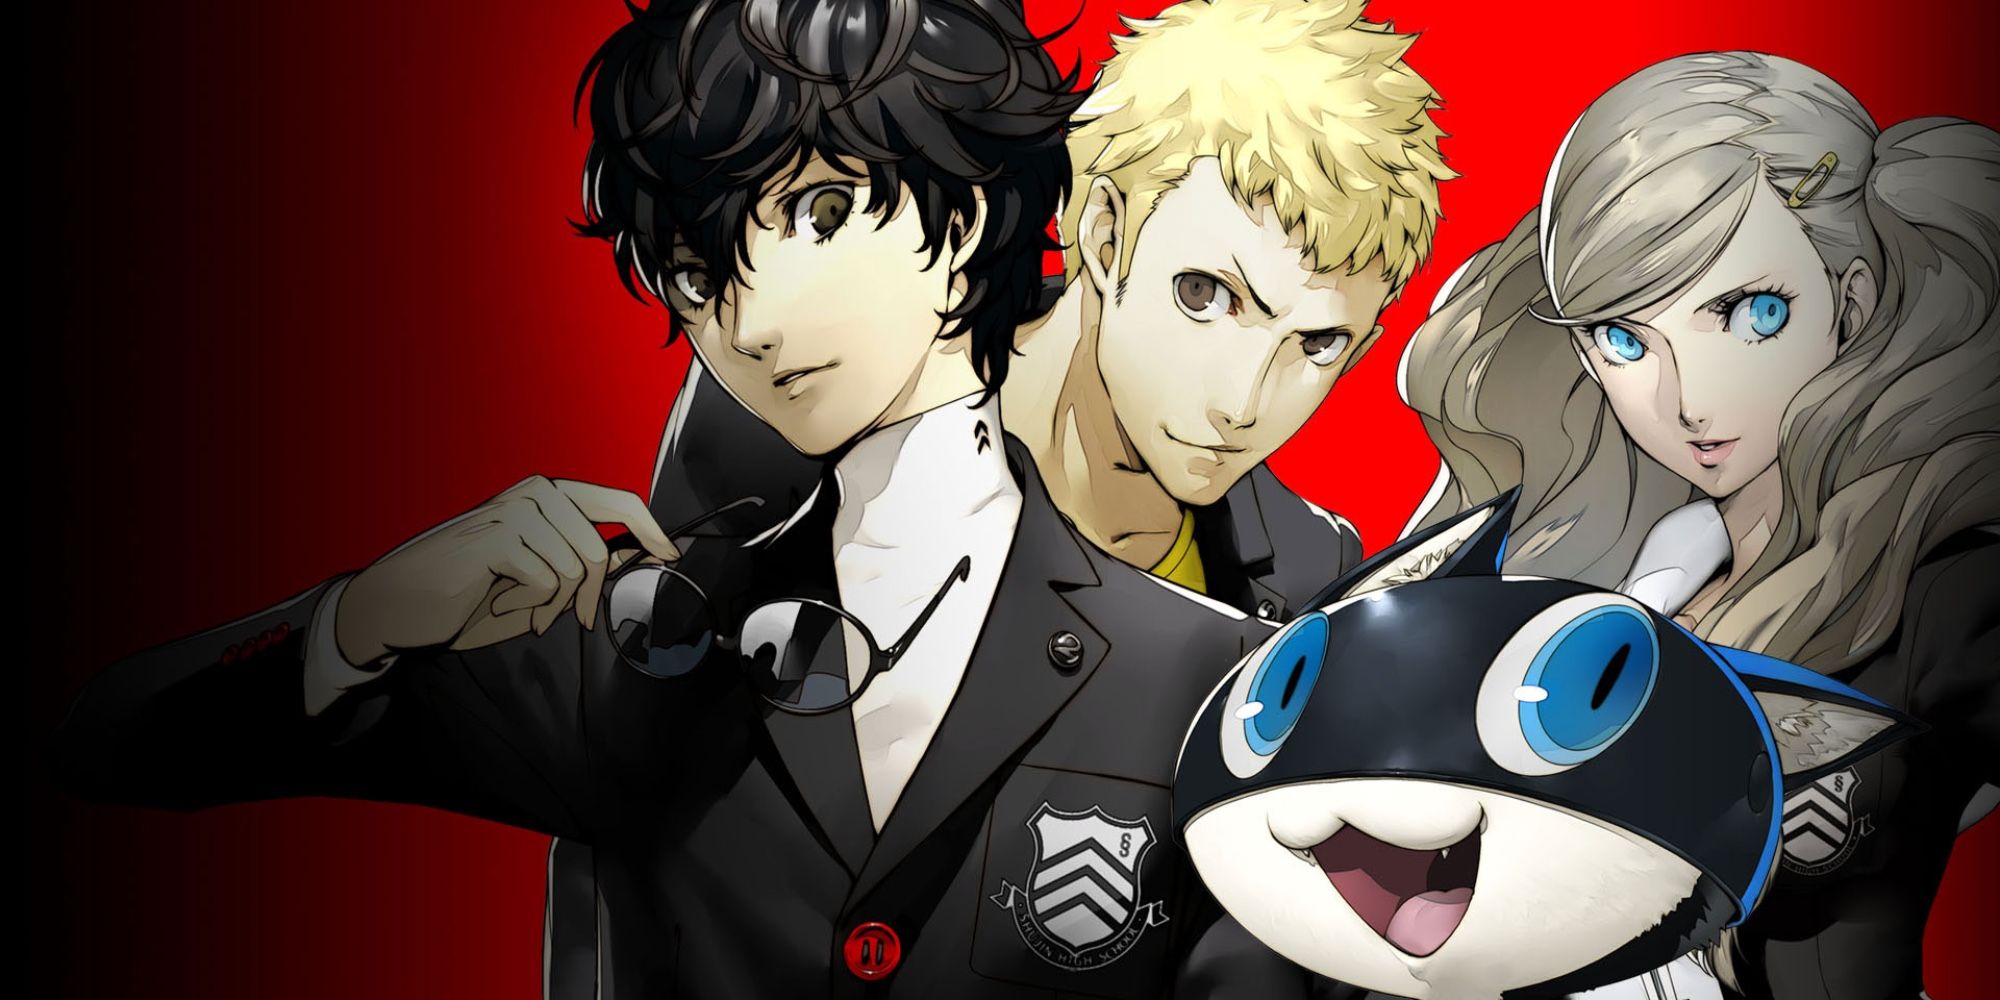 joker, morgana, and ann from persona 5